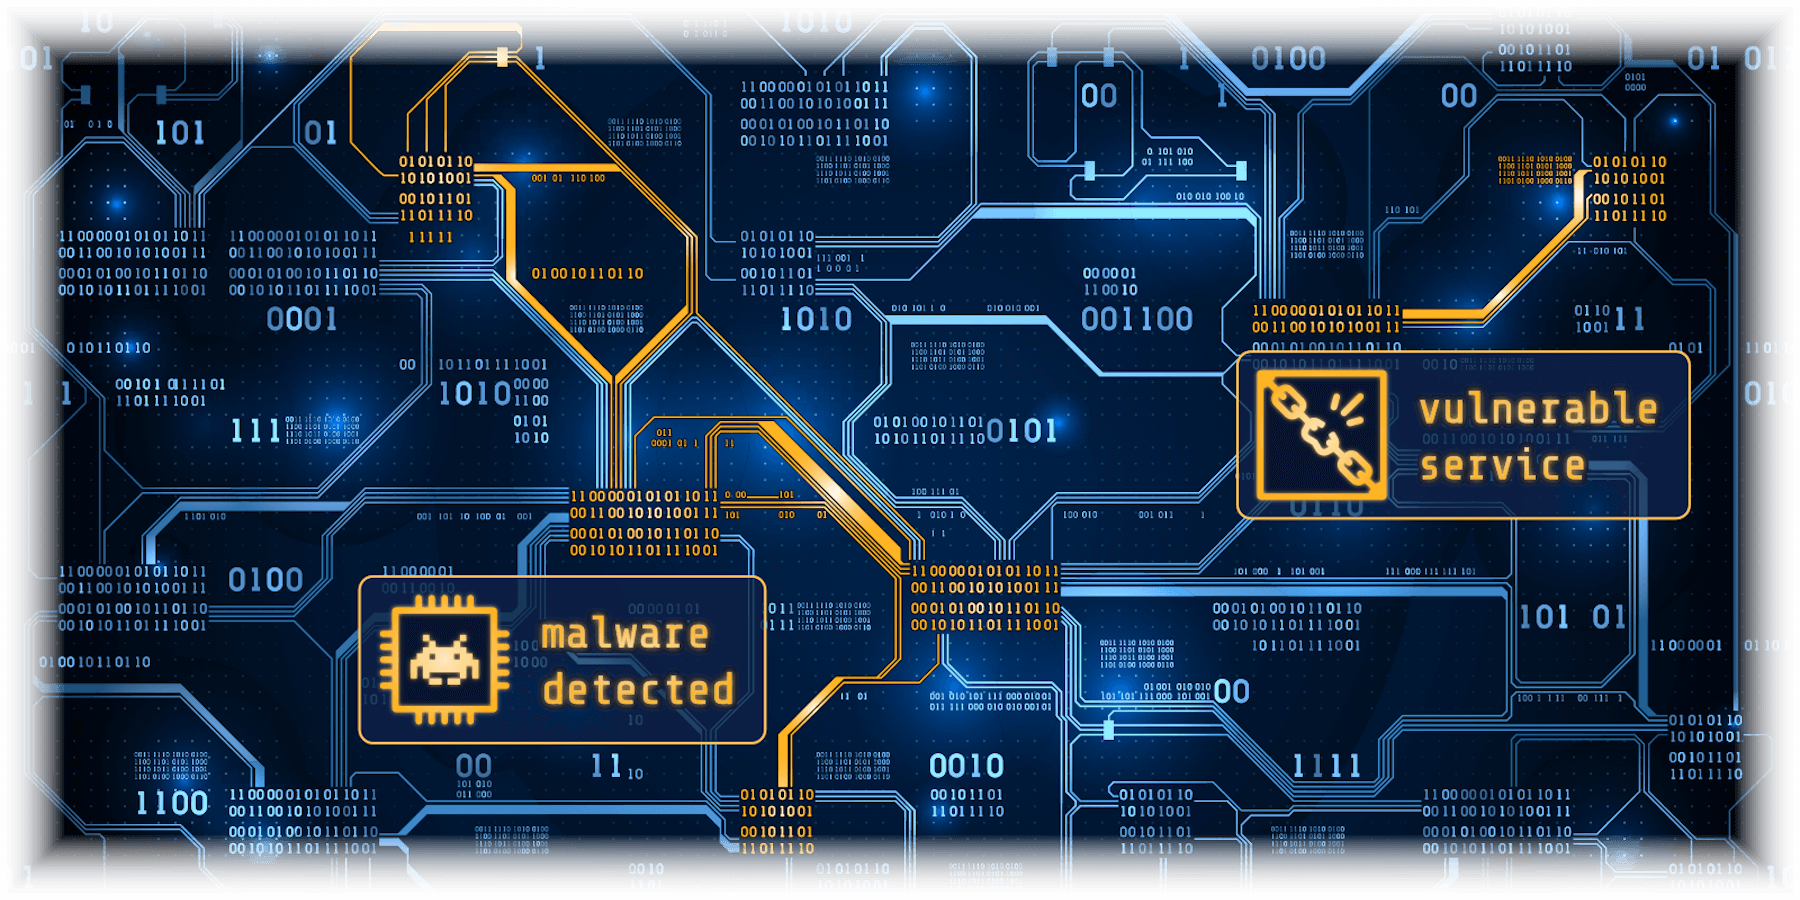 Artistic Rendering of running computer processes with malicious code and a vulnerable service highlighted.